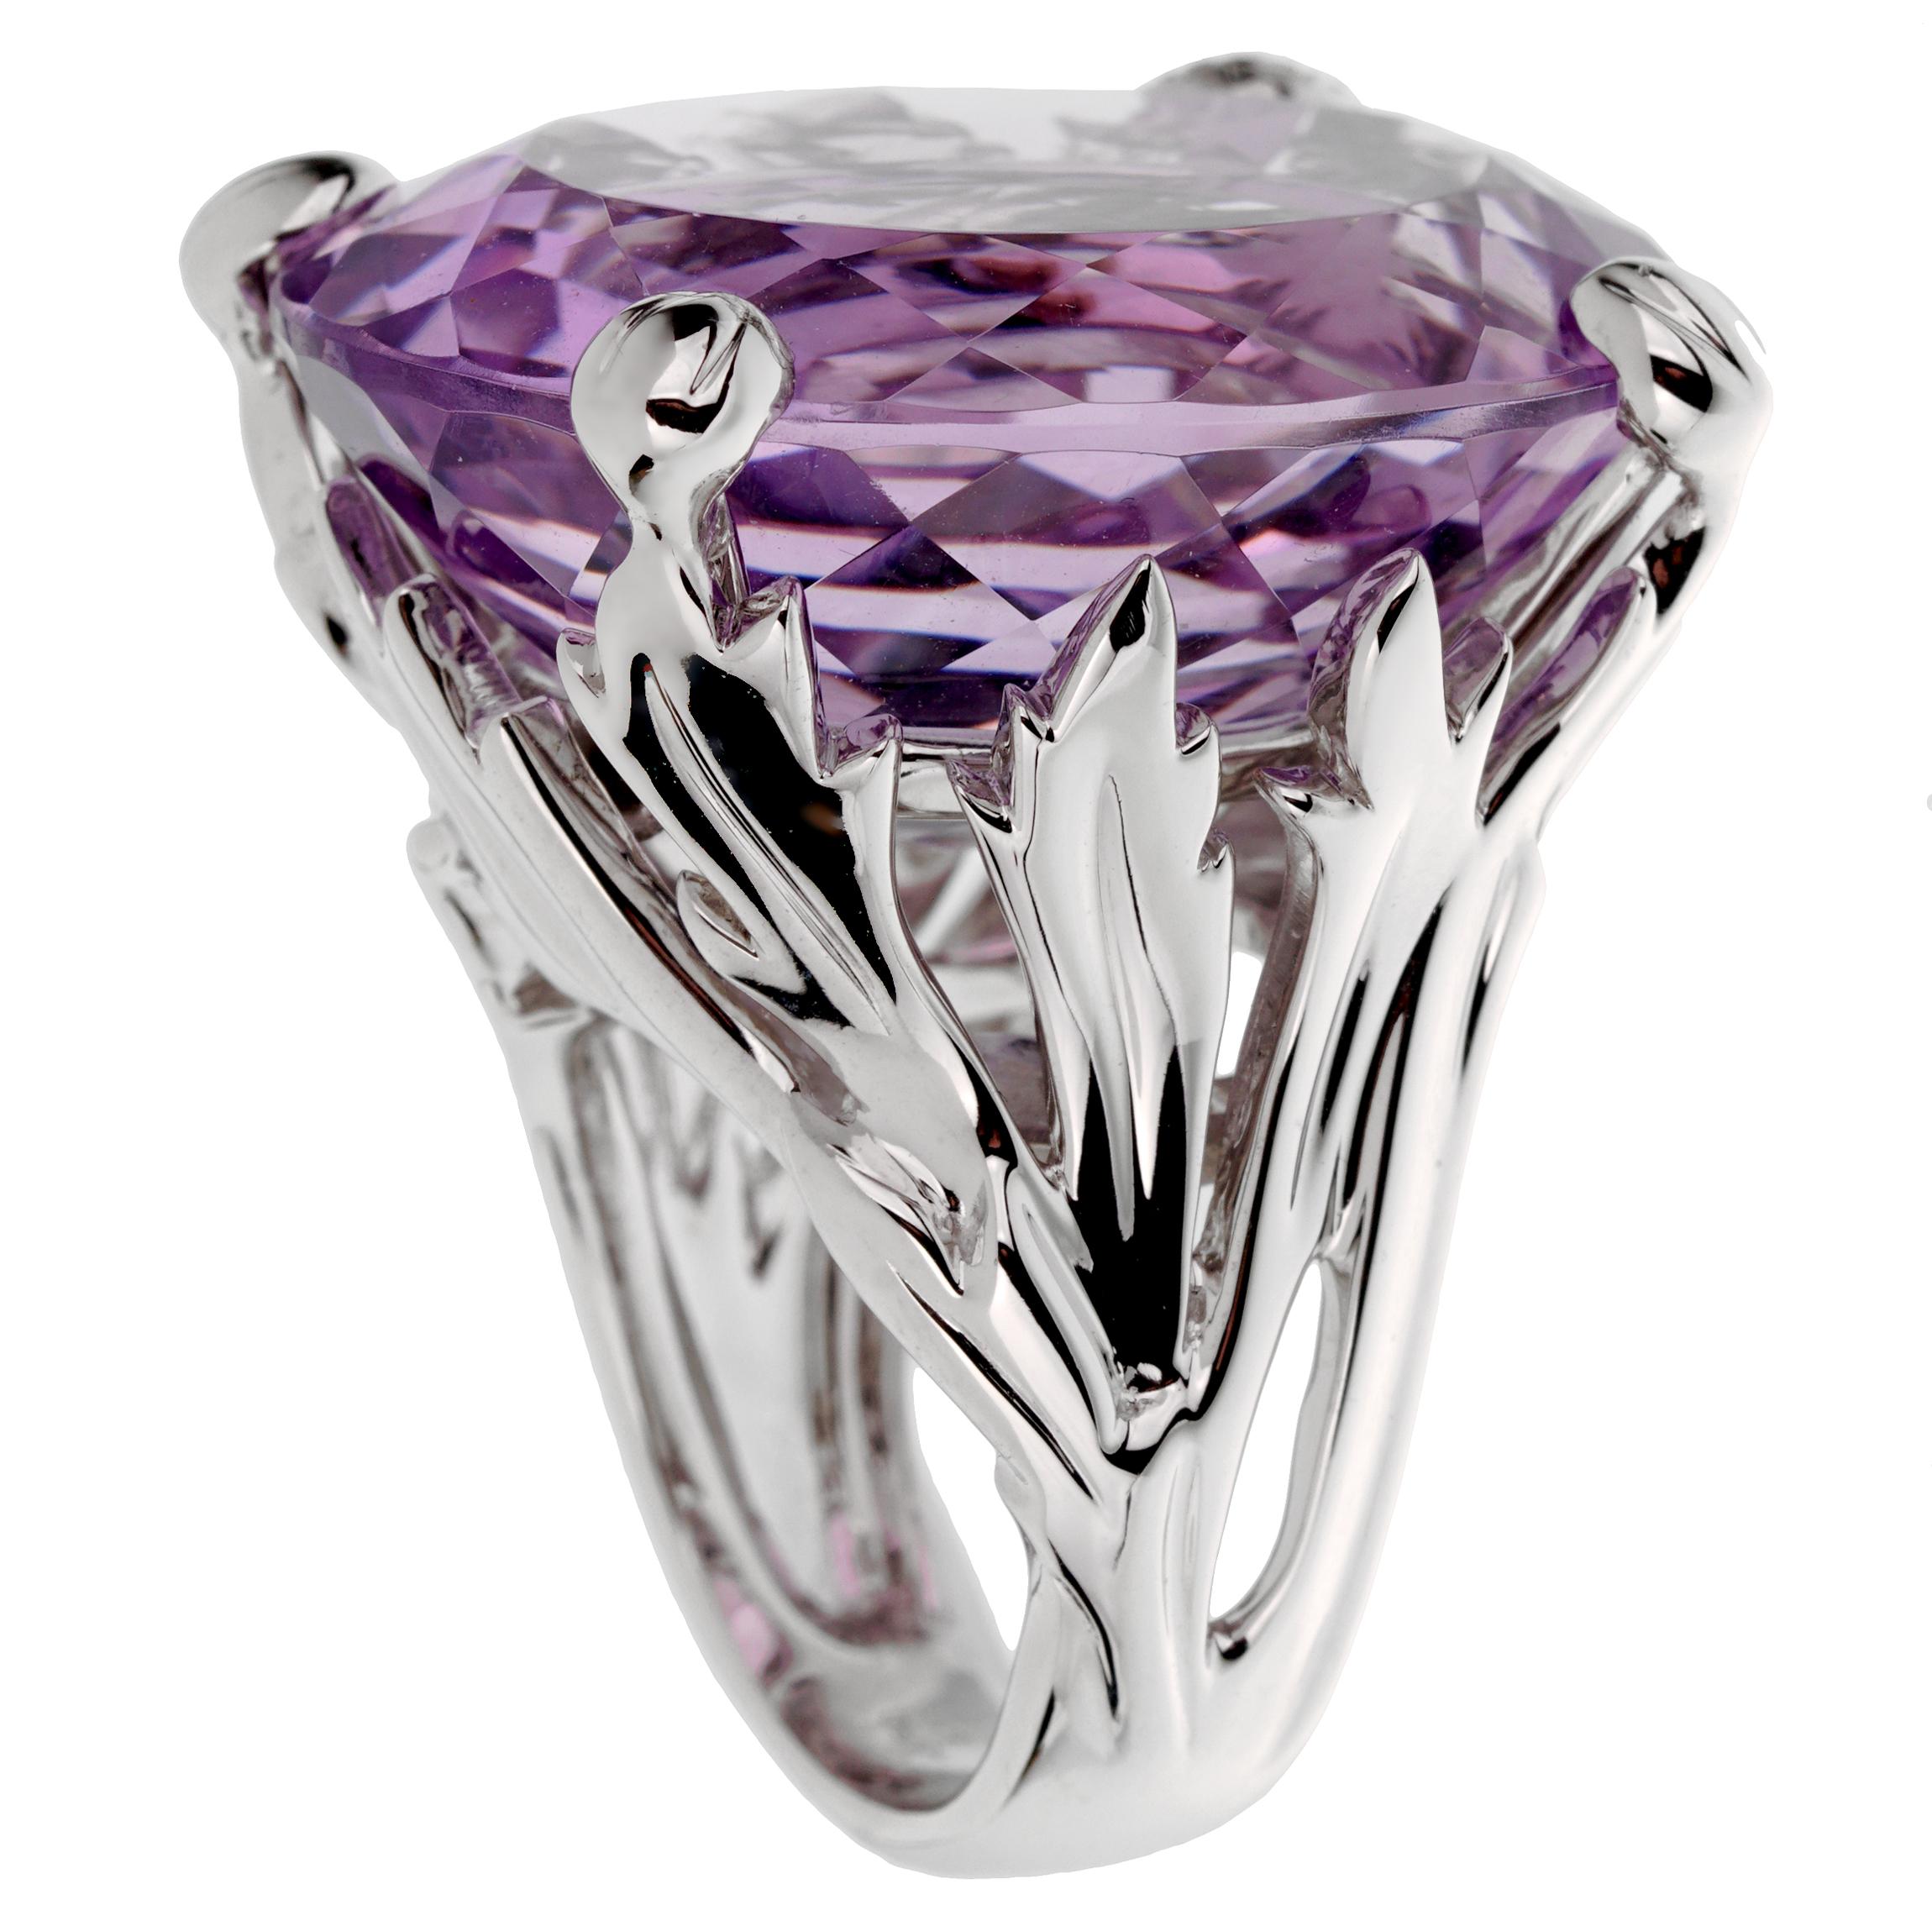 An incredible Christian Dior cocktail ring showcasing a 44.5ct oval amethyst adorned by .12ct of the finest round brilliant cut diamonds in 18k white gold. The ring measures a size 5 1/2 and can be resized if needed.